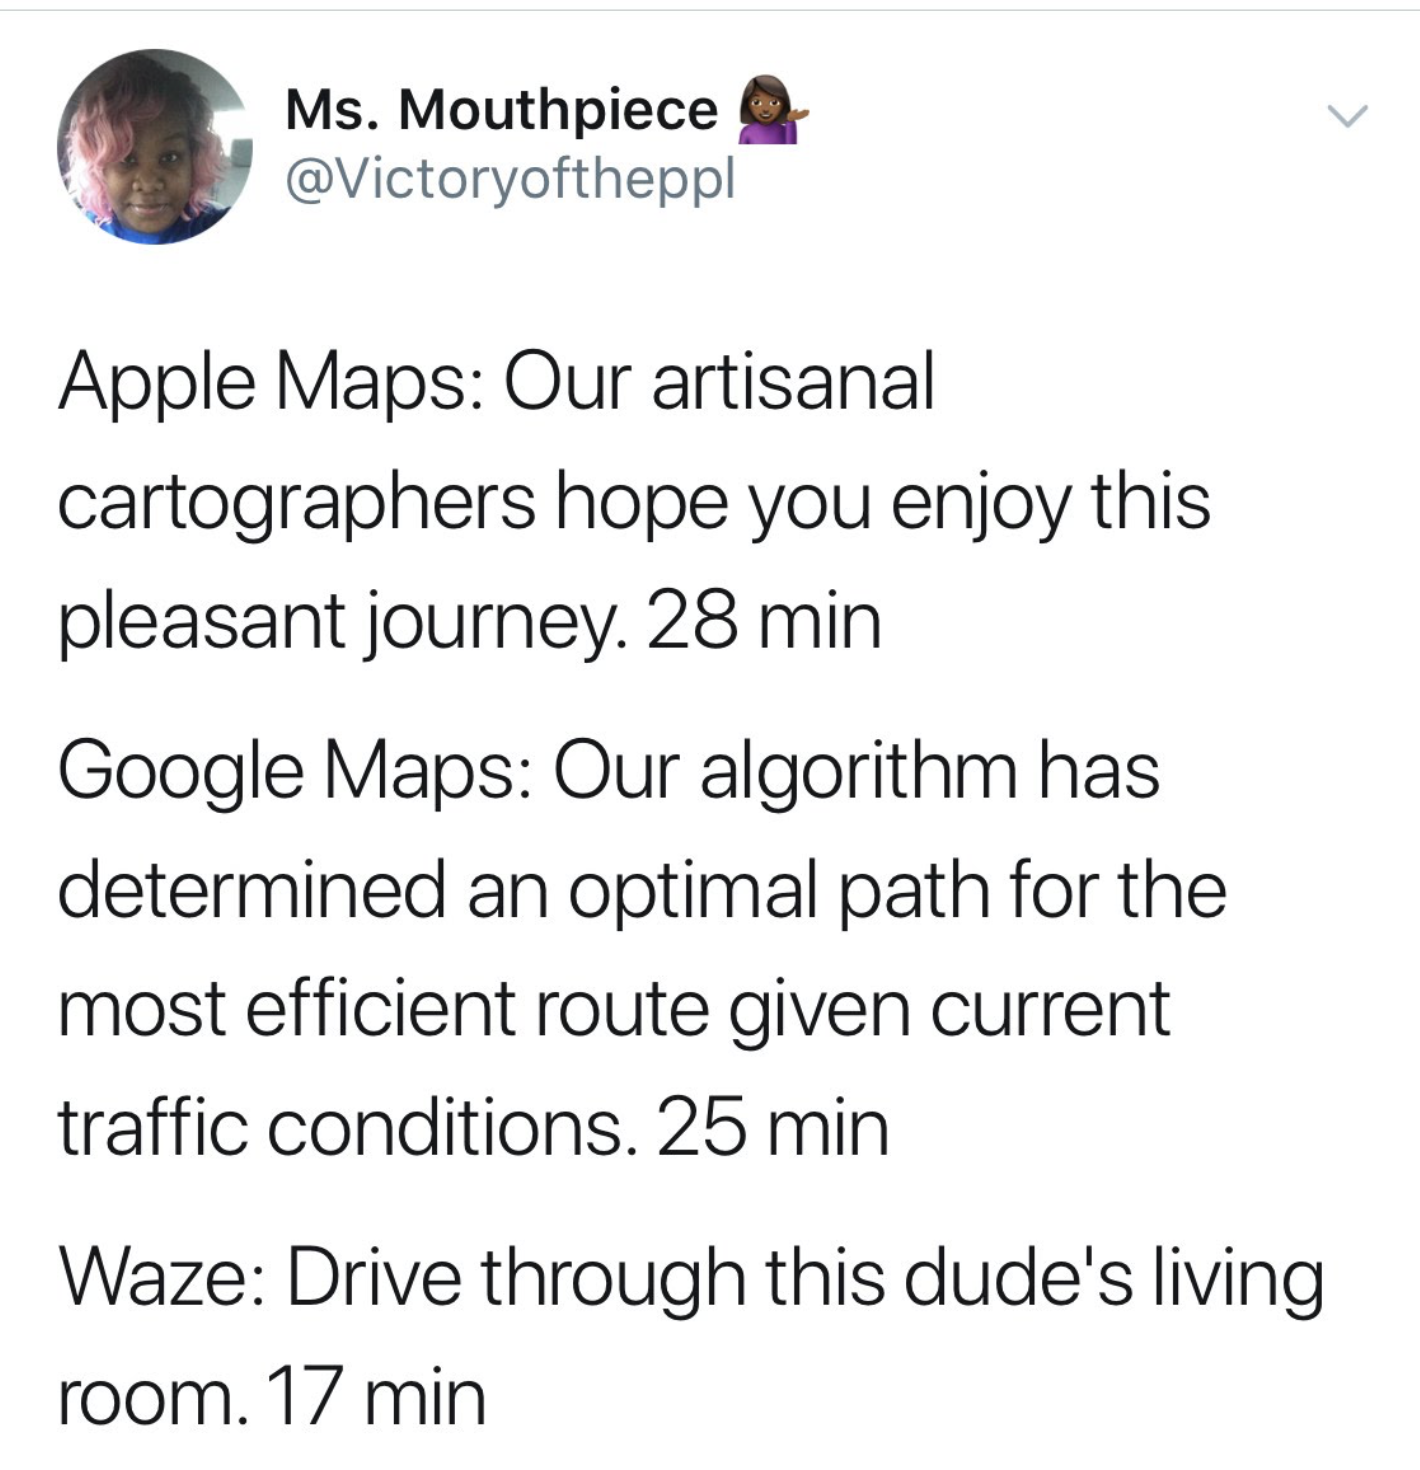 apple maps vs google maps vs waze - Ms. Mouthpiece Apple Maps Our artisanal cartographers hope you enjoy this pleasant journey. 28 min Google Maps Our algorithm has determined an optimal path for the most efficient route given current traffic conditions. 